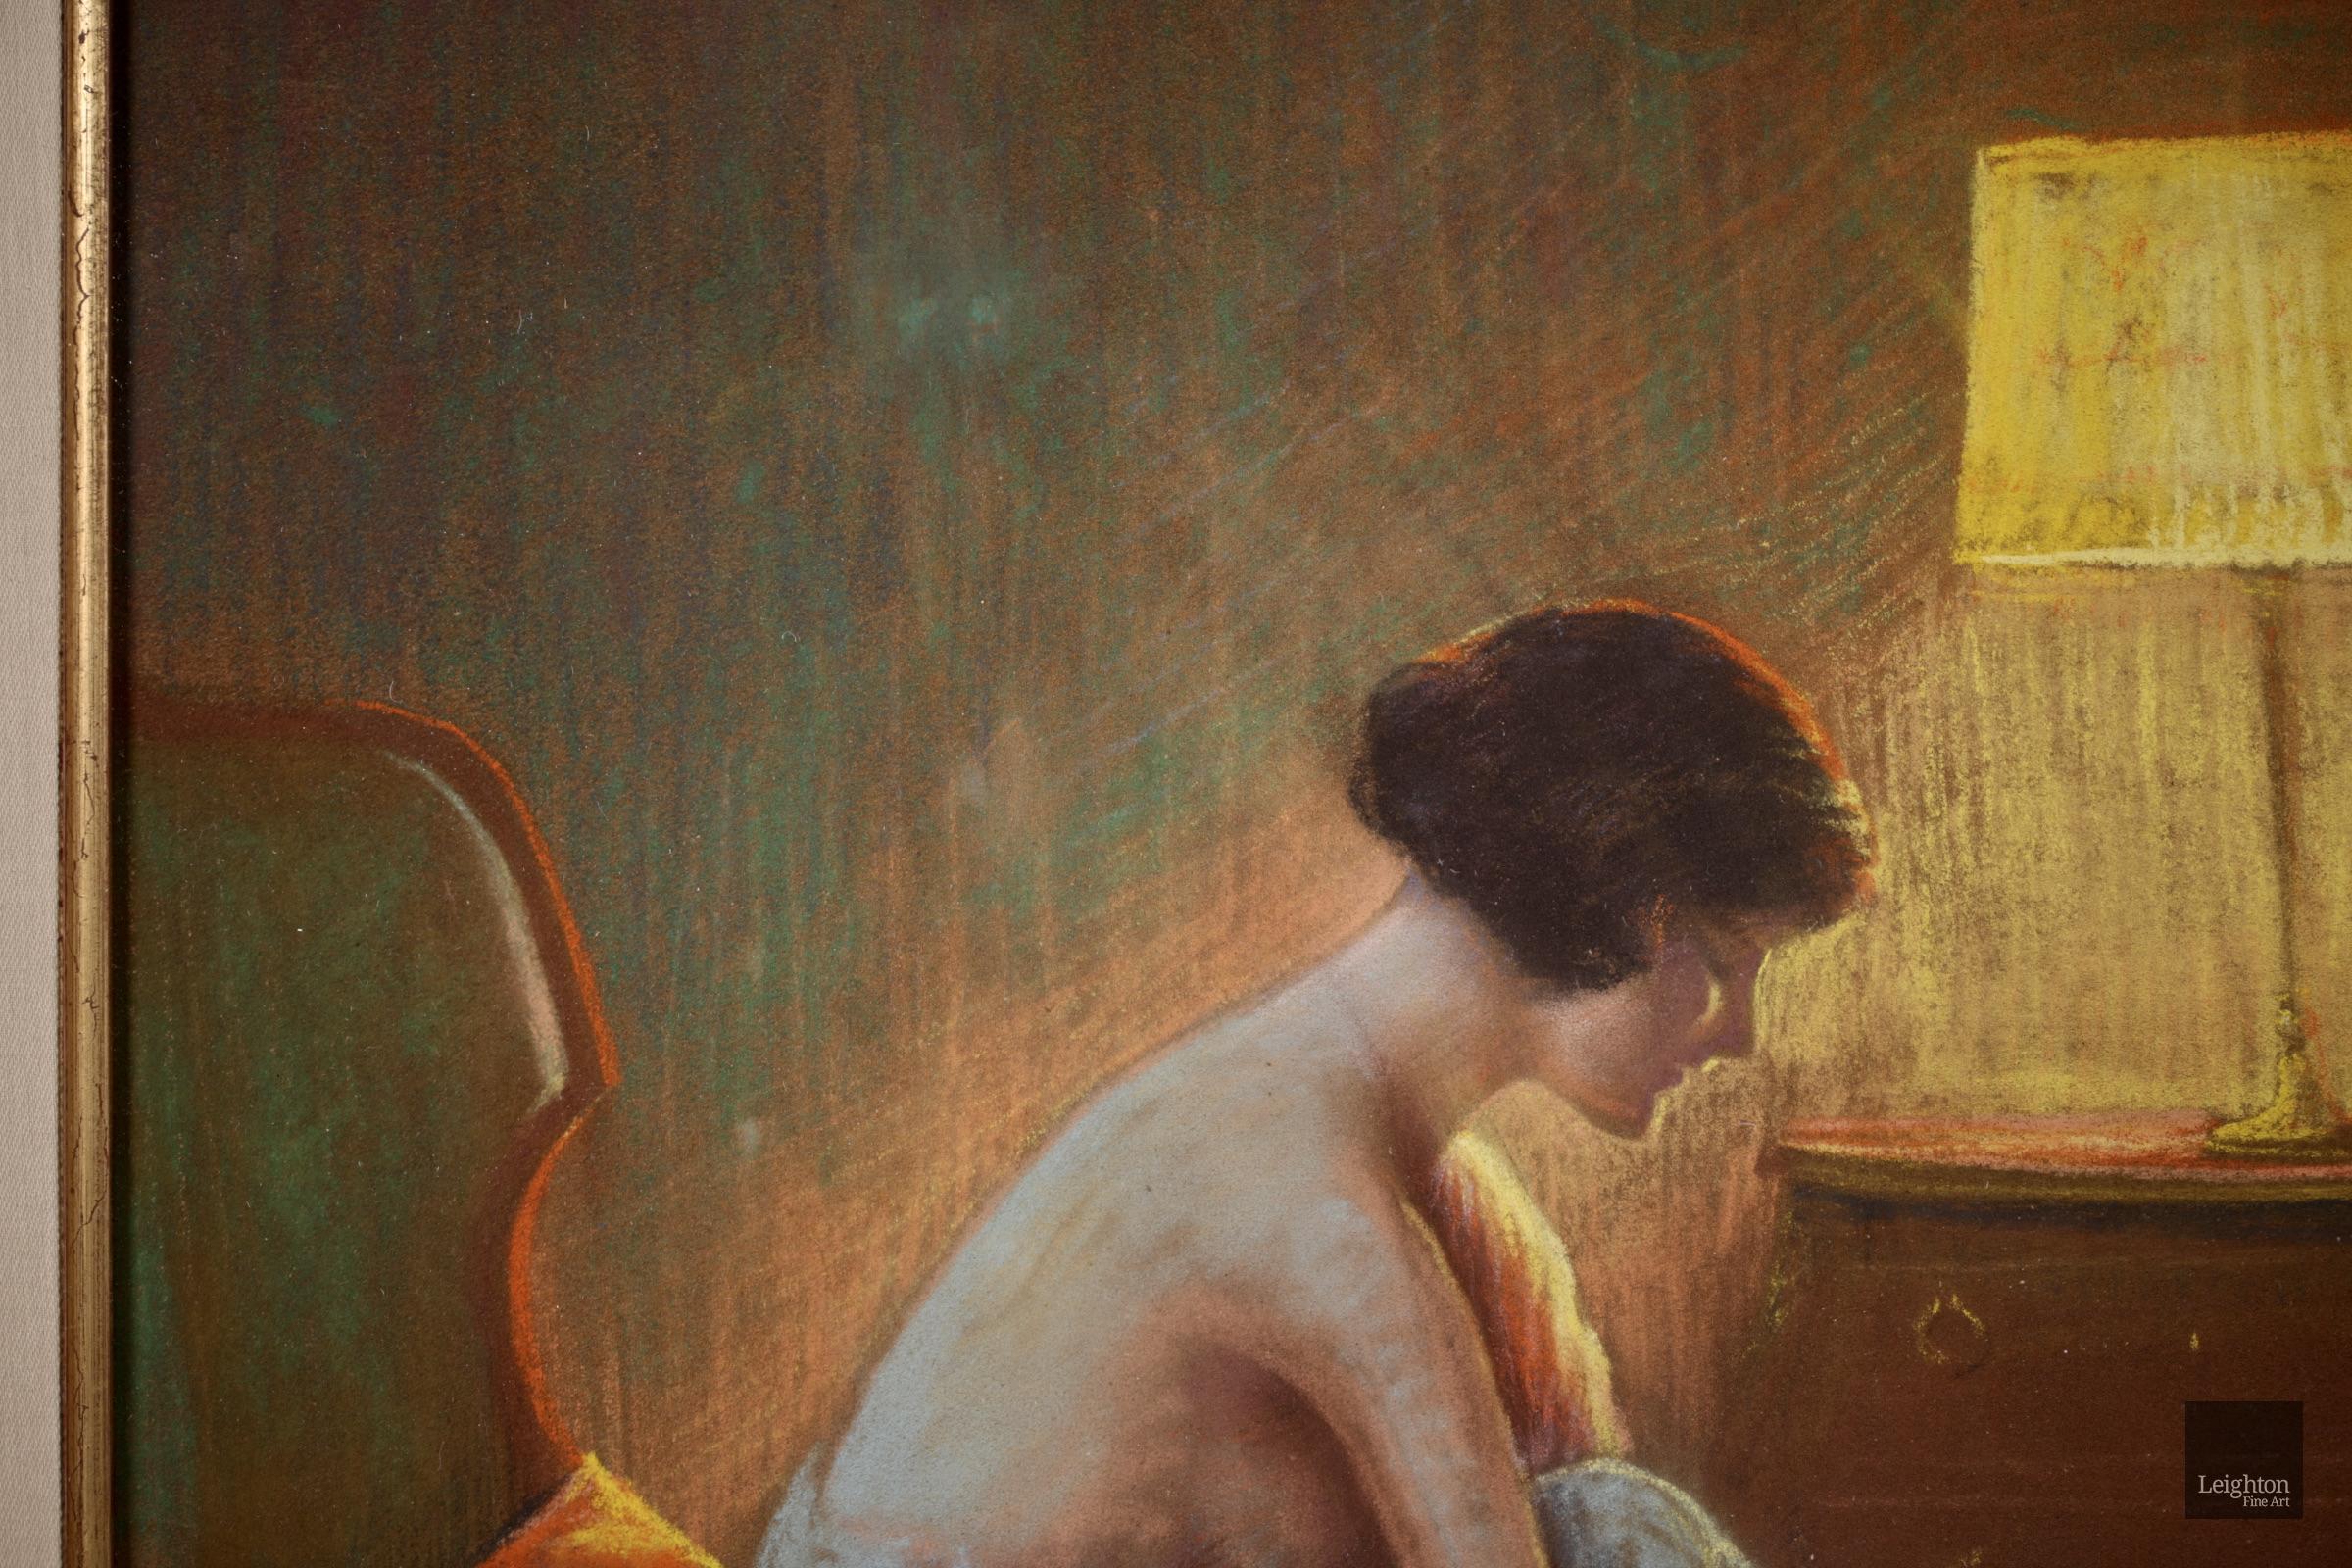 A beautiful pastel on board circa 1920 by French academic painter Delphin Enjolras. The work depicts a beautiful brunette woman seated in a chair in a bedroom interior. The room is illuminated by a the light of a lamp.

Signature:
Signed lower